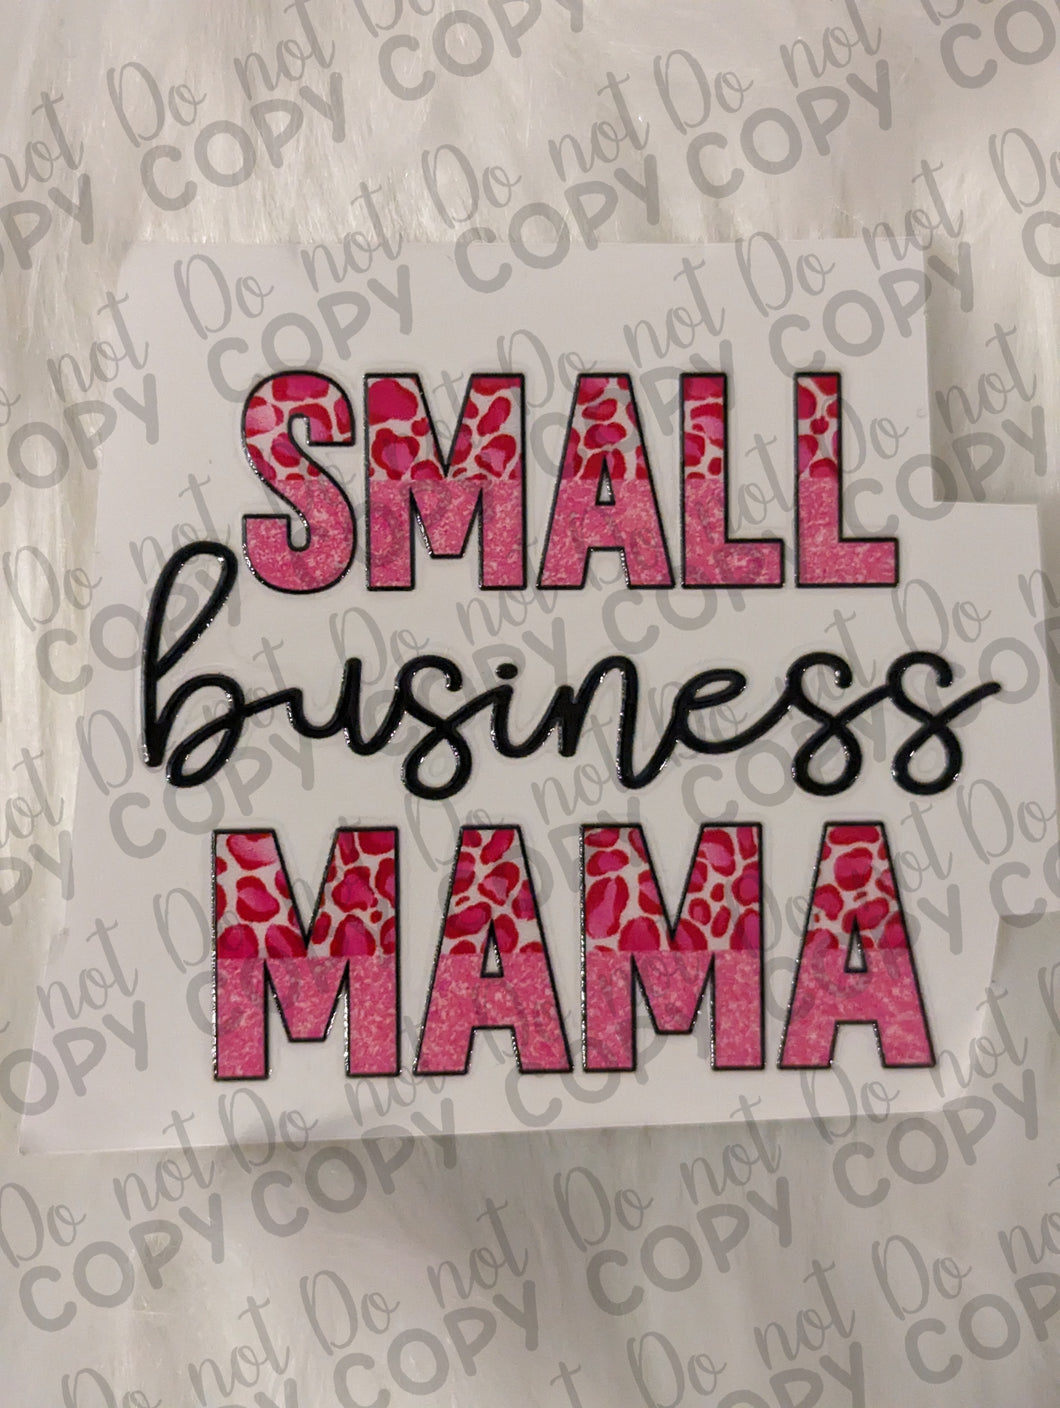 RTS Small Business Mama Pink Leopard UV DTF Print